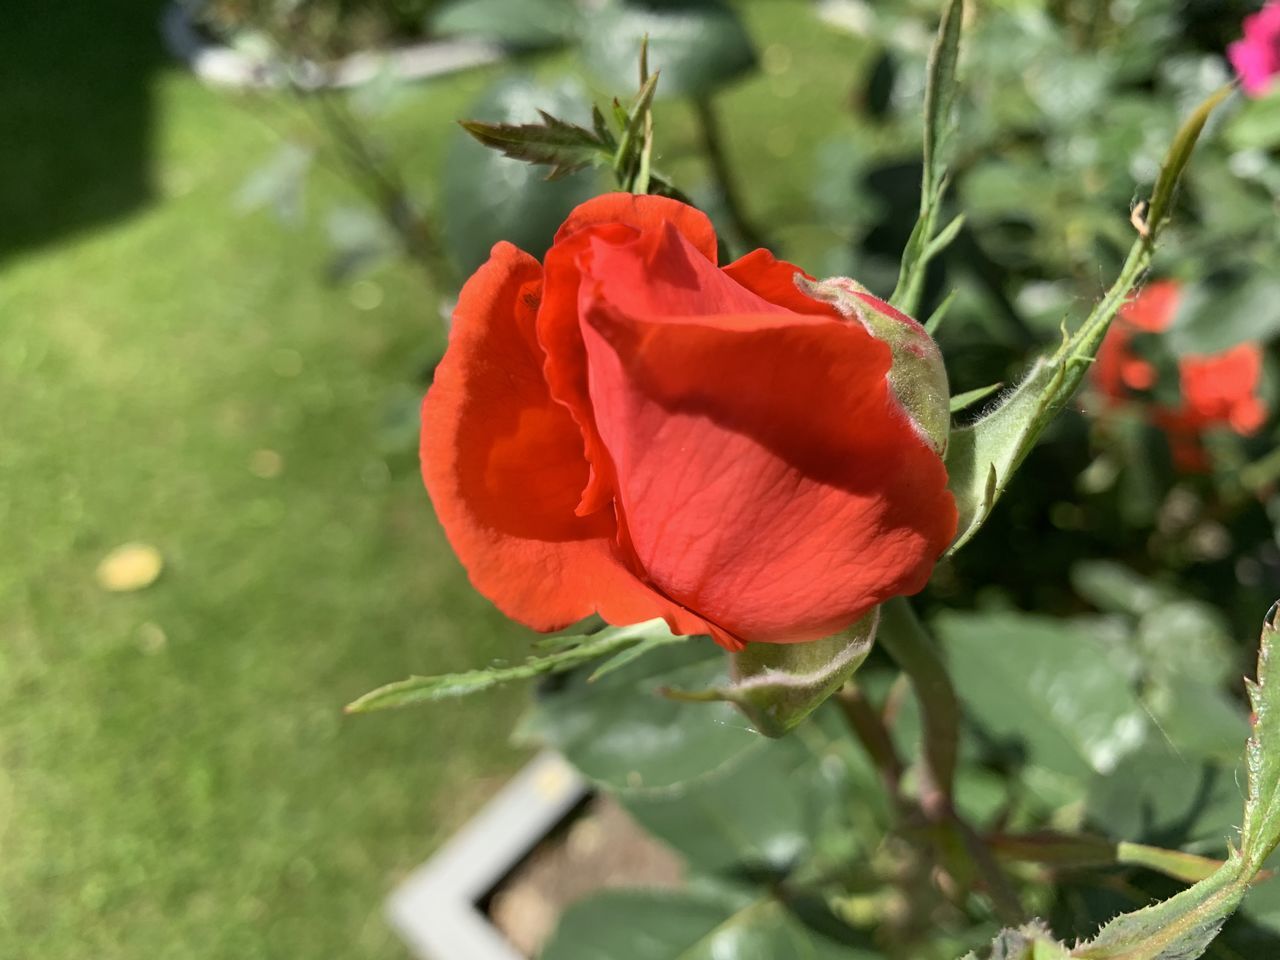 CLOSE-UP OF RED ROSE ON PLANT